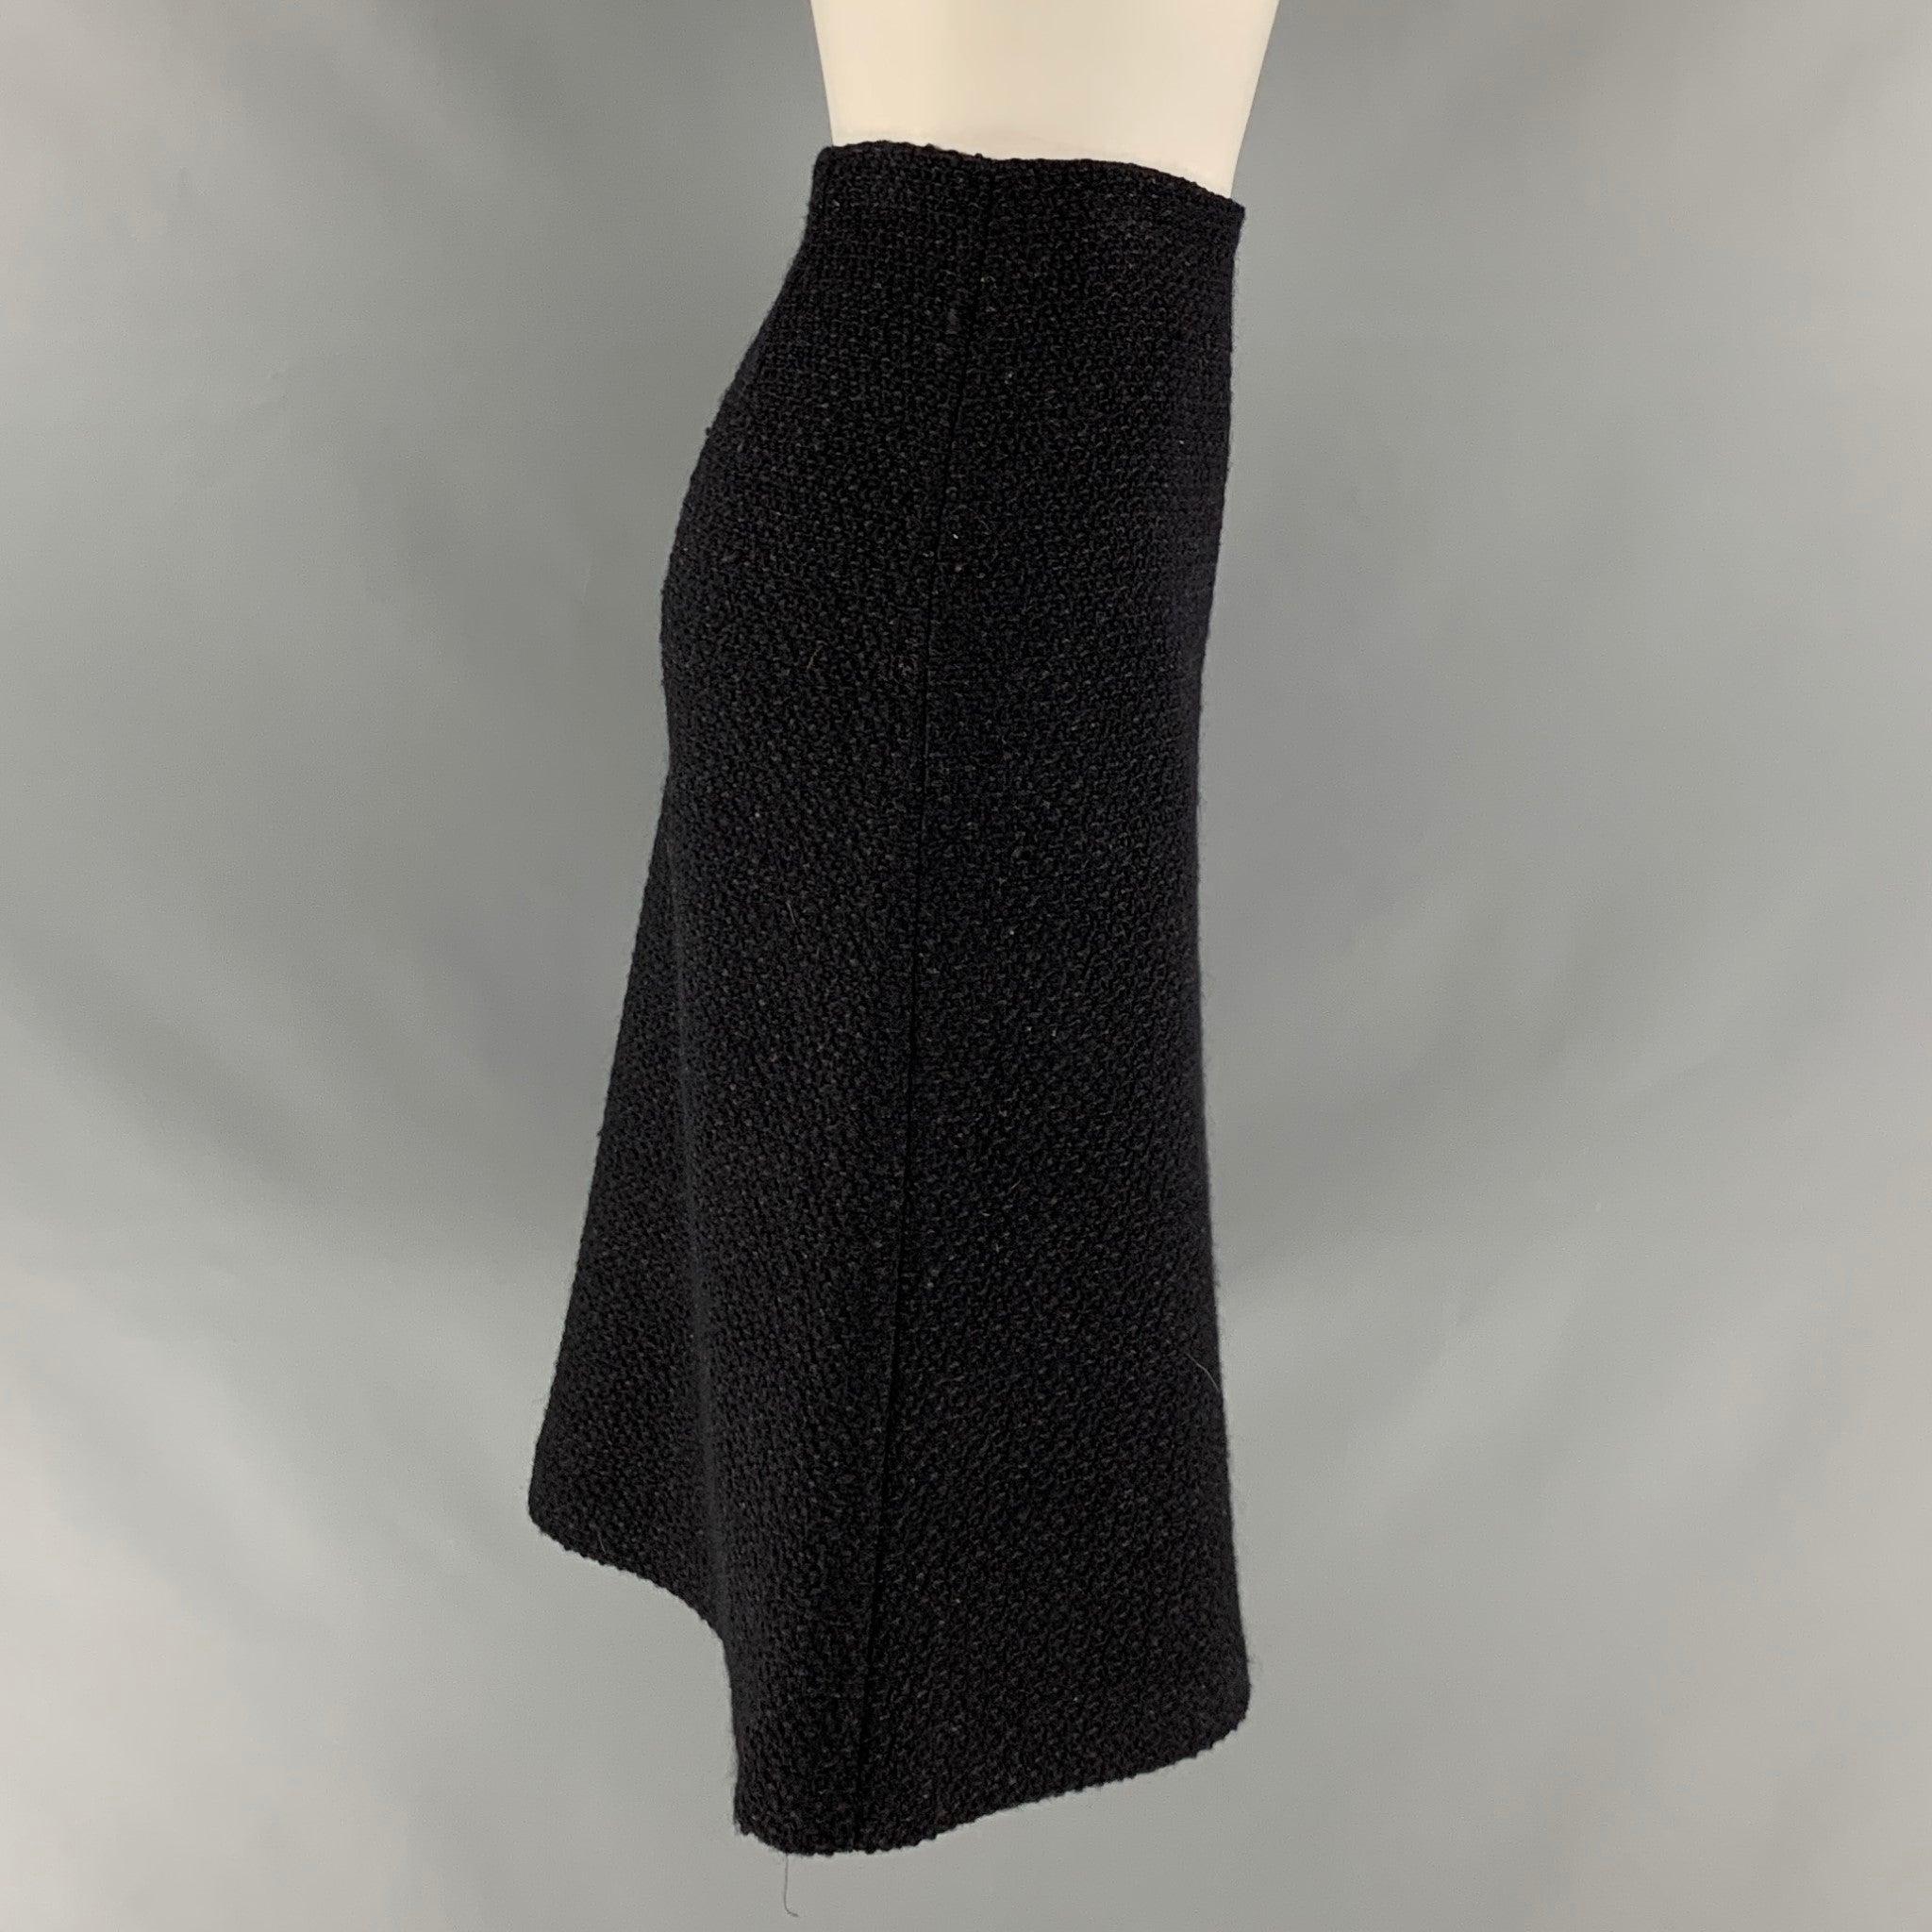 DEREK LAM skirt comes in a black textured boucle featuring a pencil style and a side zip up closure.
 Very Good Pre-Owned Condition. 

Marked:   no size marked 

Measurements: 
  Waist: 30 inches  Hip: 36 inches  Length: 25 inches  
  
  
